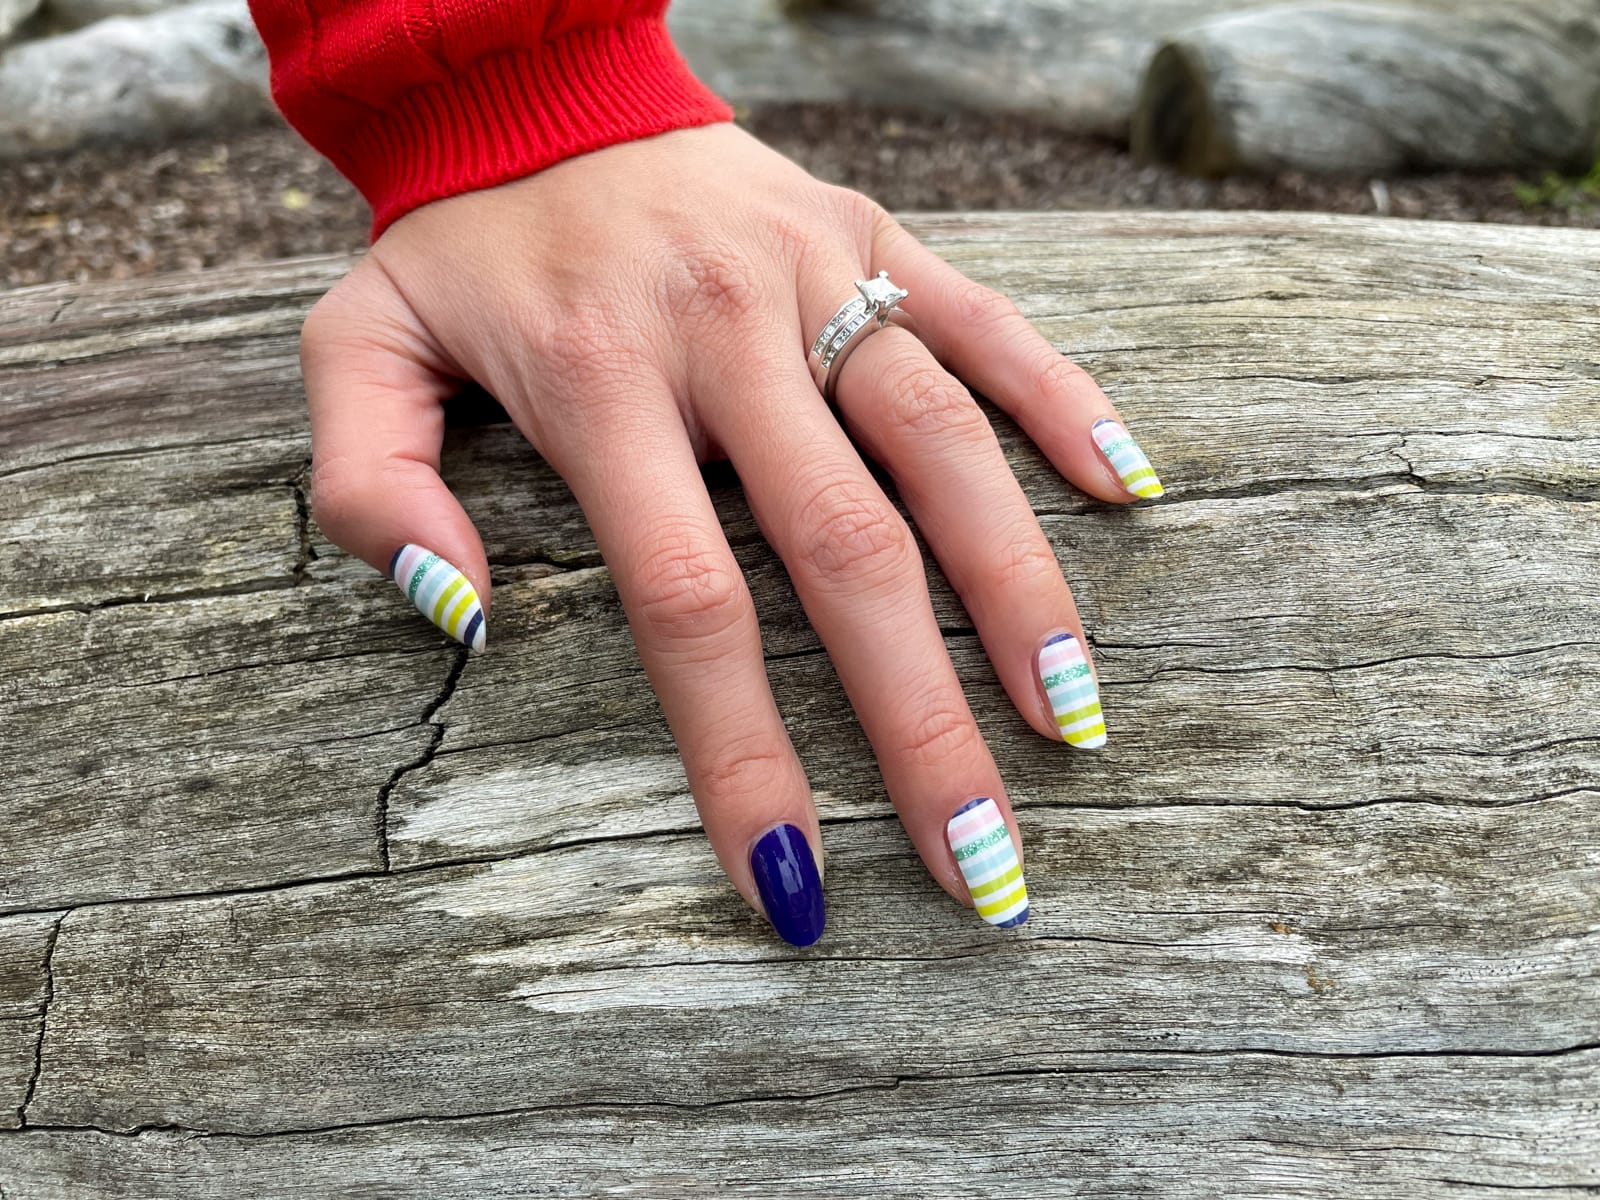 A close-up of a woman’s nail art which has colourful horizontal stripes and a blue accent nail on the index finder. There is a silver engagement ring and wedding ring on her ring finger. Her hand is resting on a giant log.